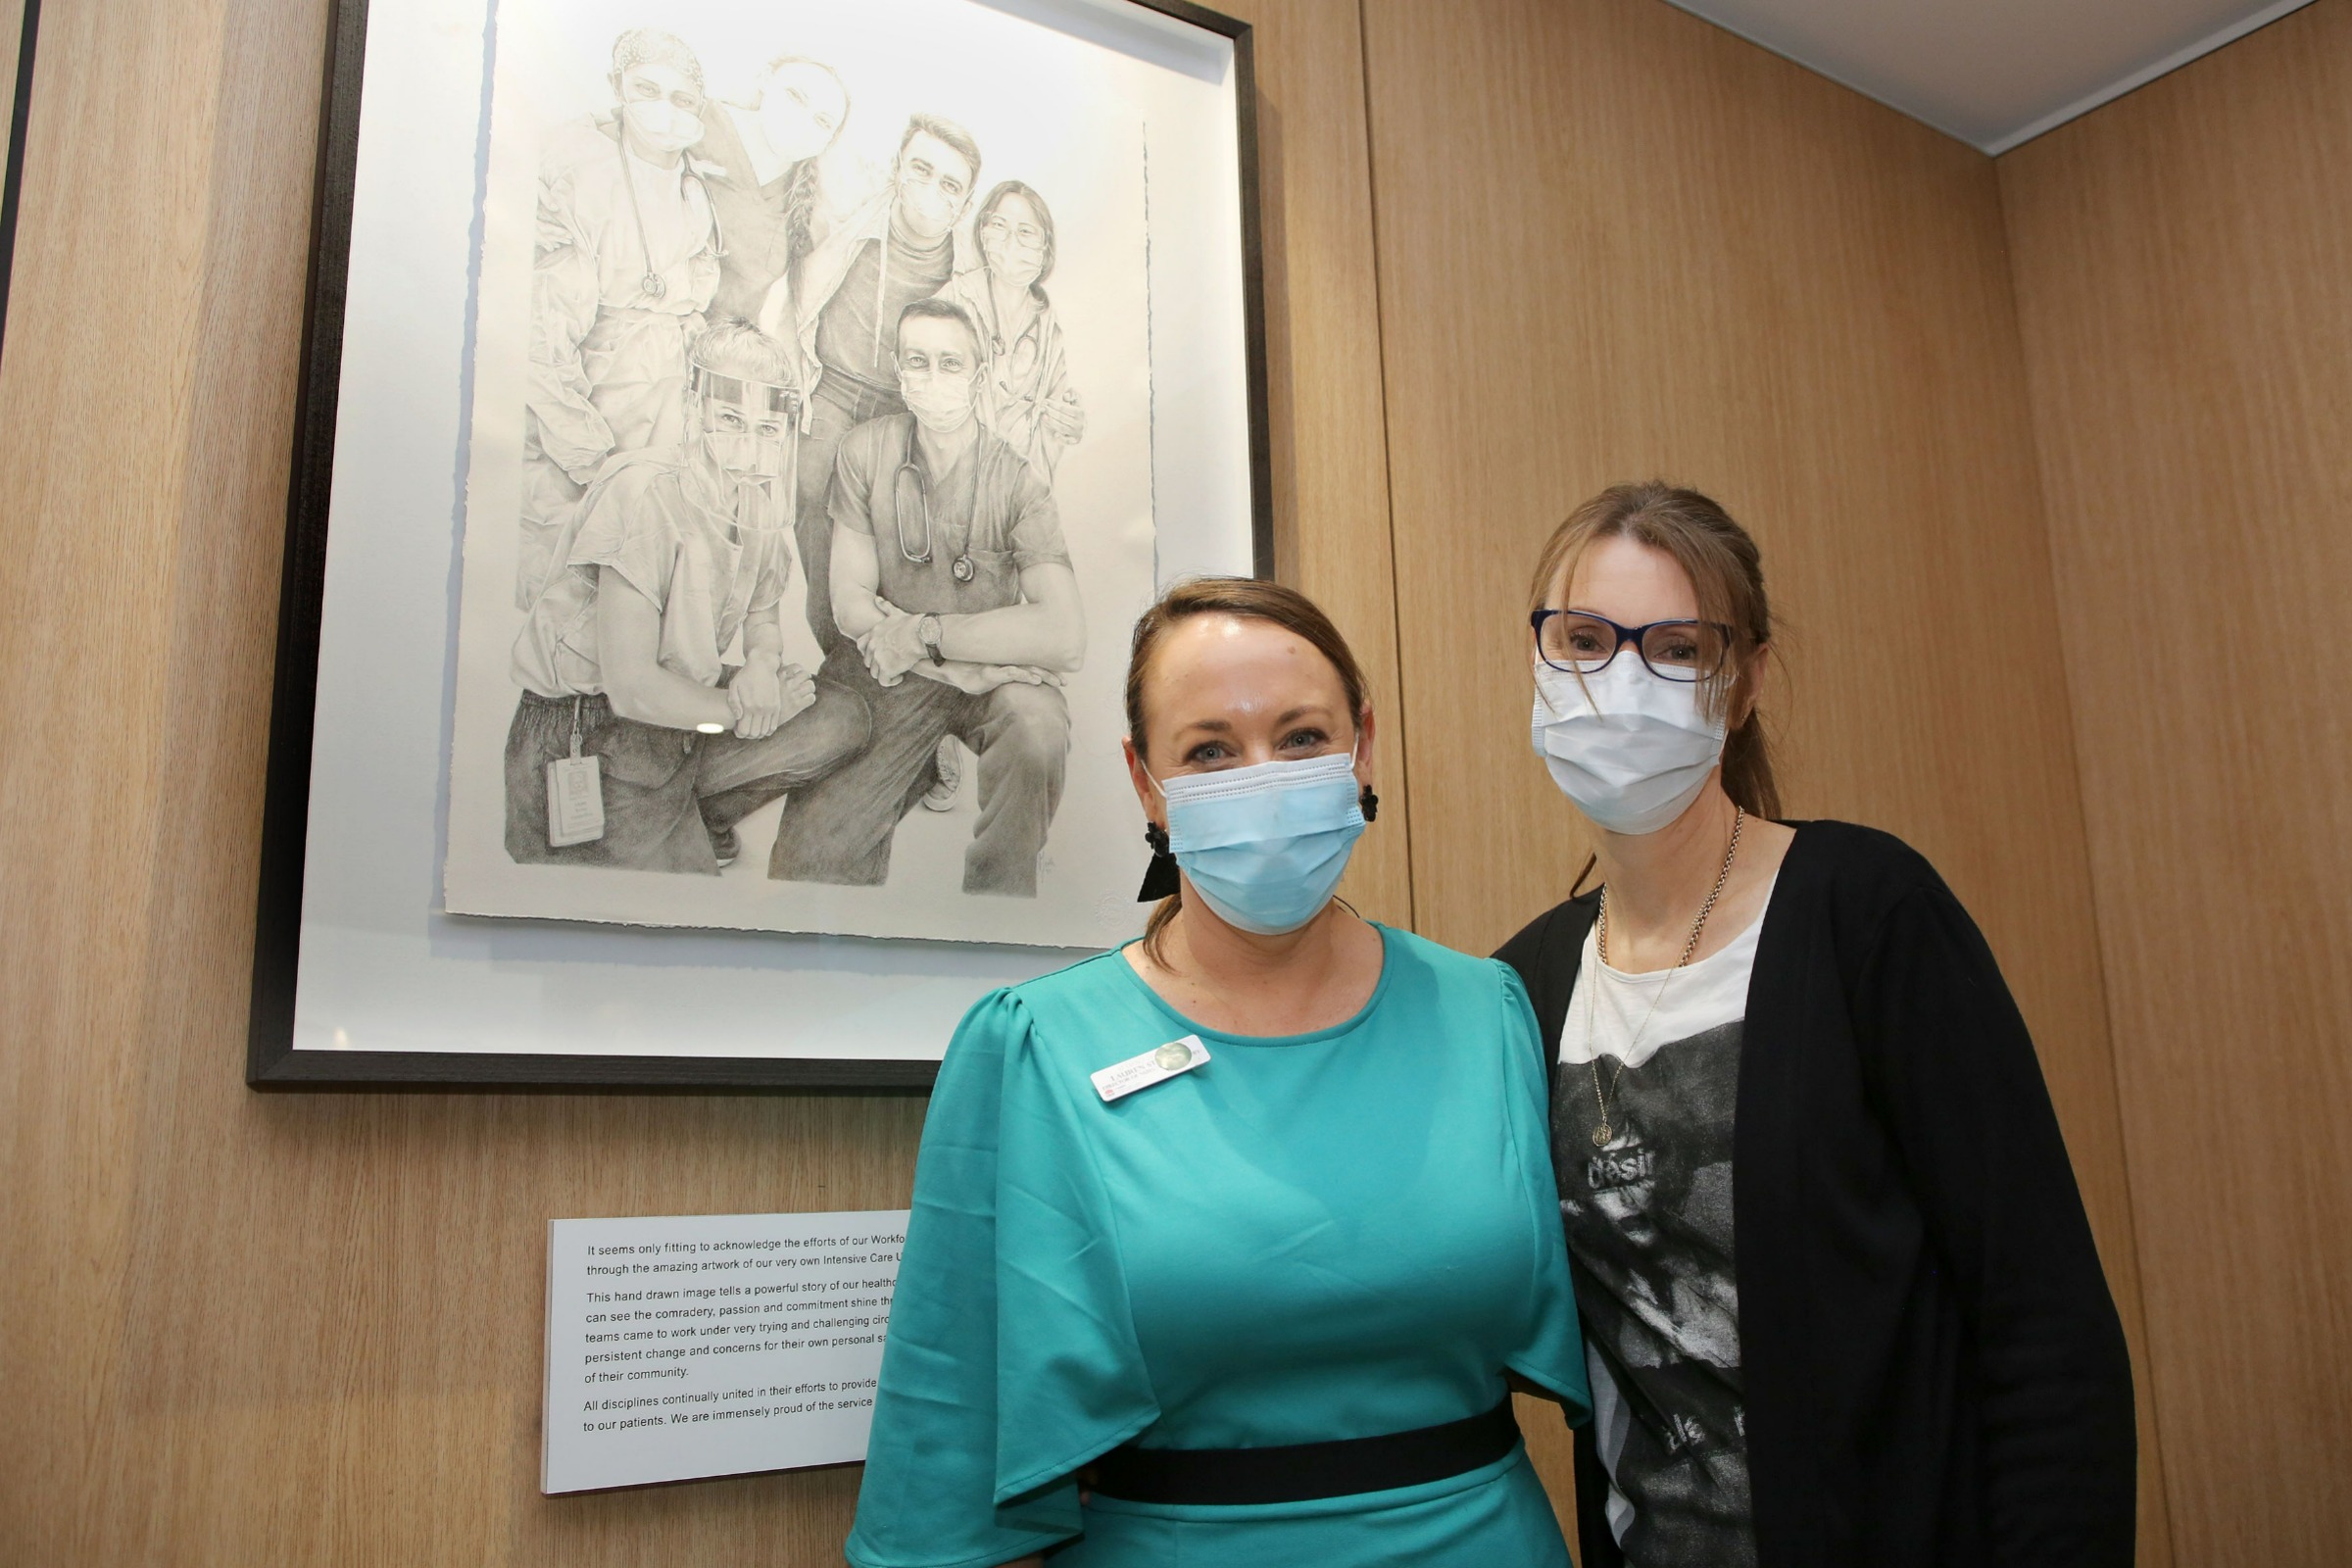 Lauren Sturgess and Jennifer North stand in front of a pencil drawing of hospital staff during the COVID-19 pandemic.